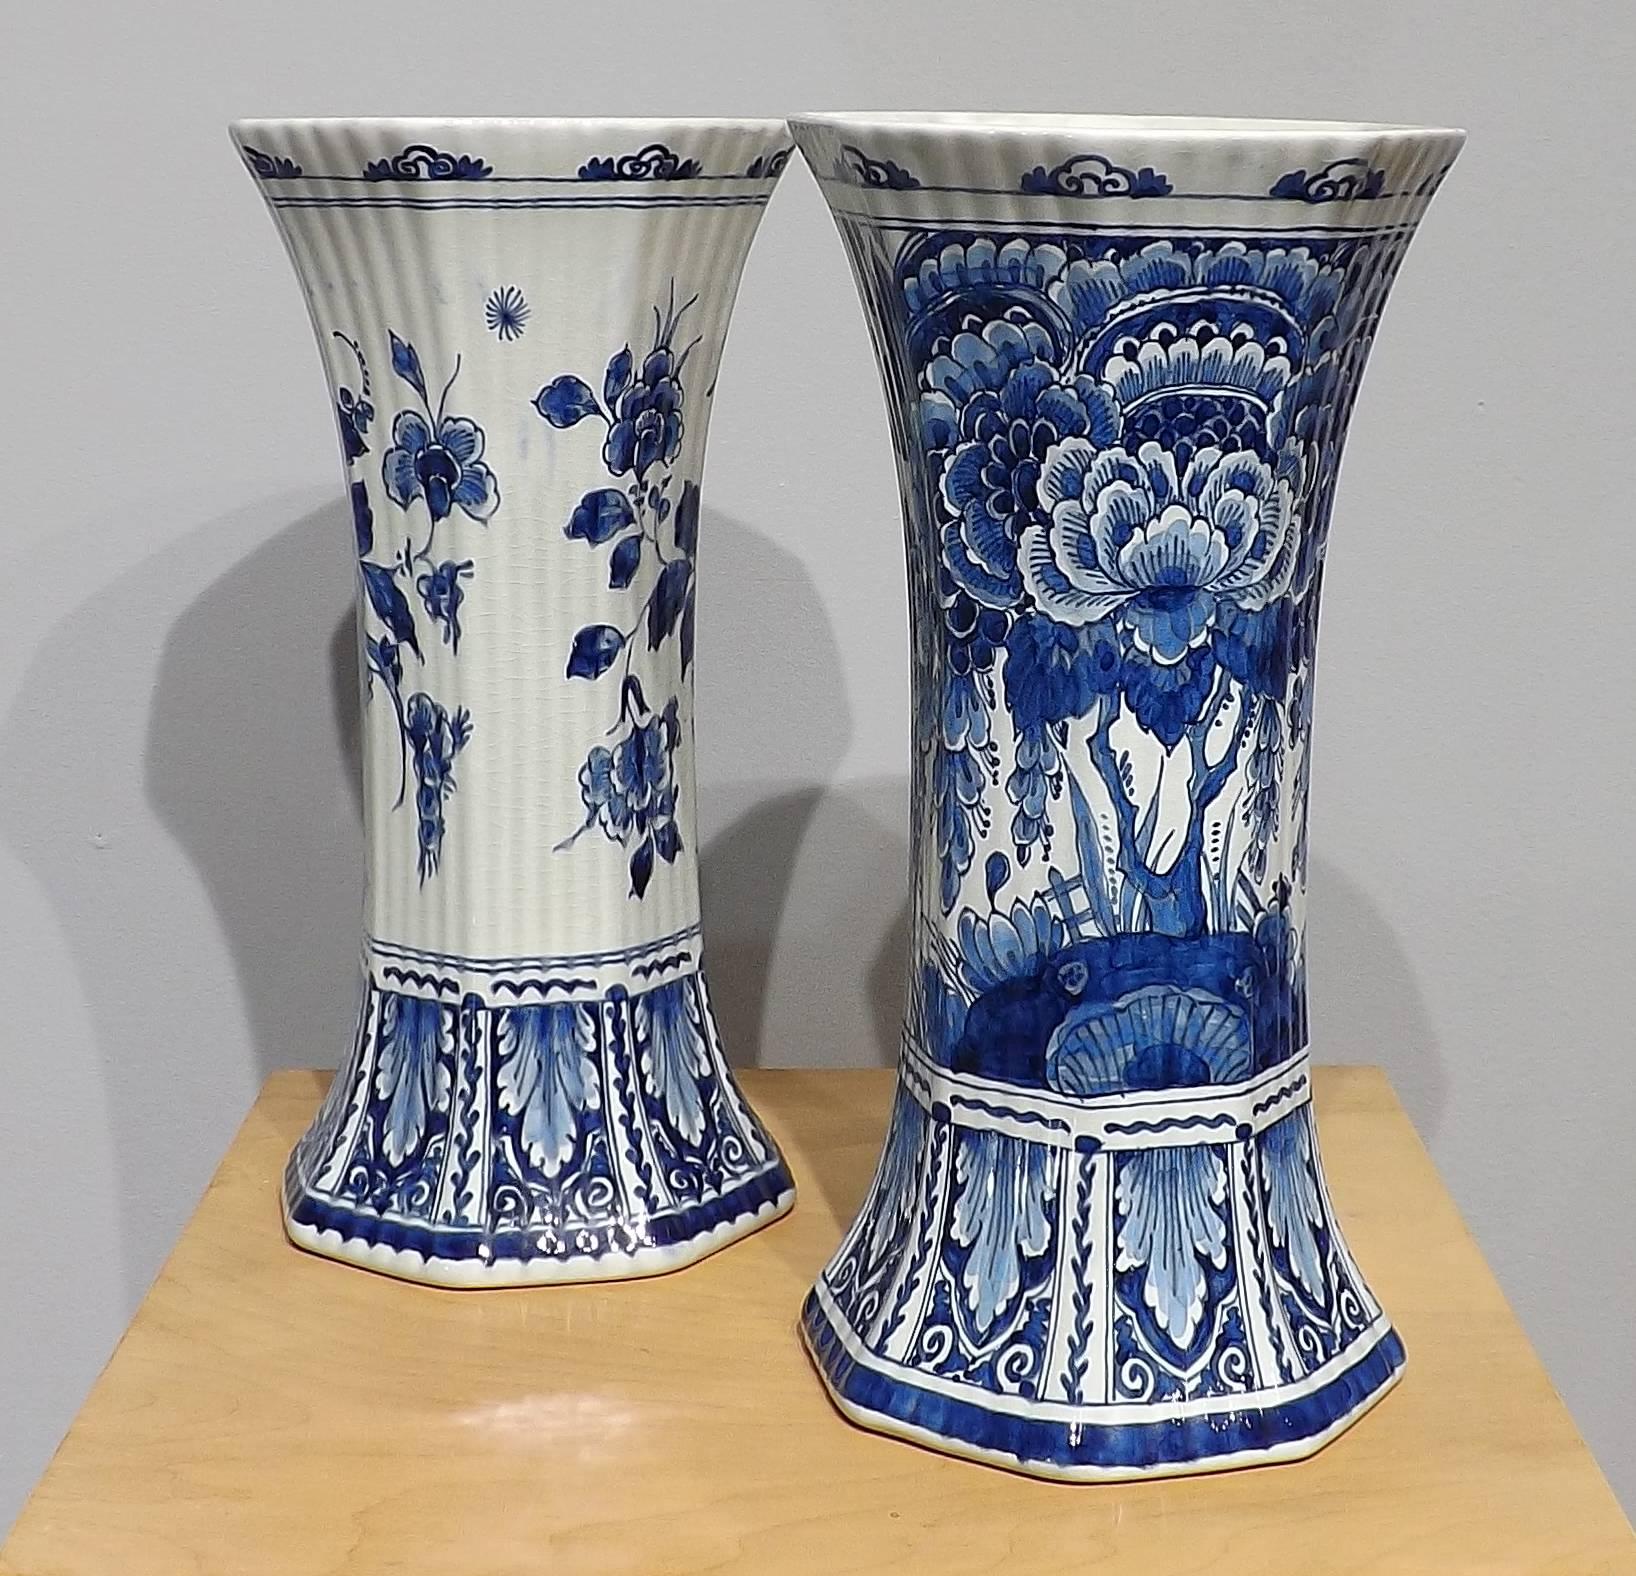 A stunning matched pair of Royal Delft blue vases. Graceful lines extend from the base, across the hand-painted body and up to the flared top. Marked with the bottle mark of De Porcelijne Fles pottery (better known as Royal Delft) and with a year